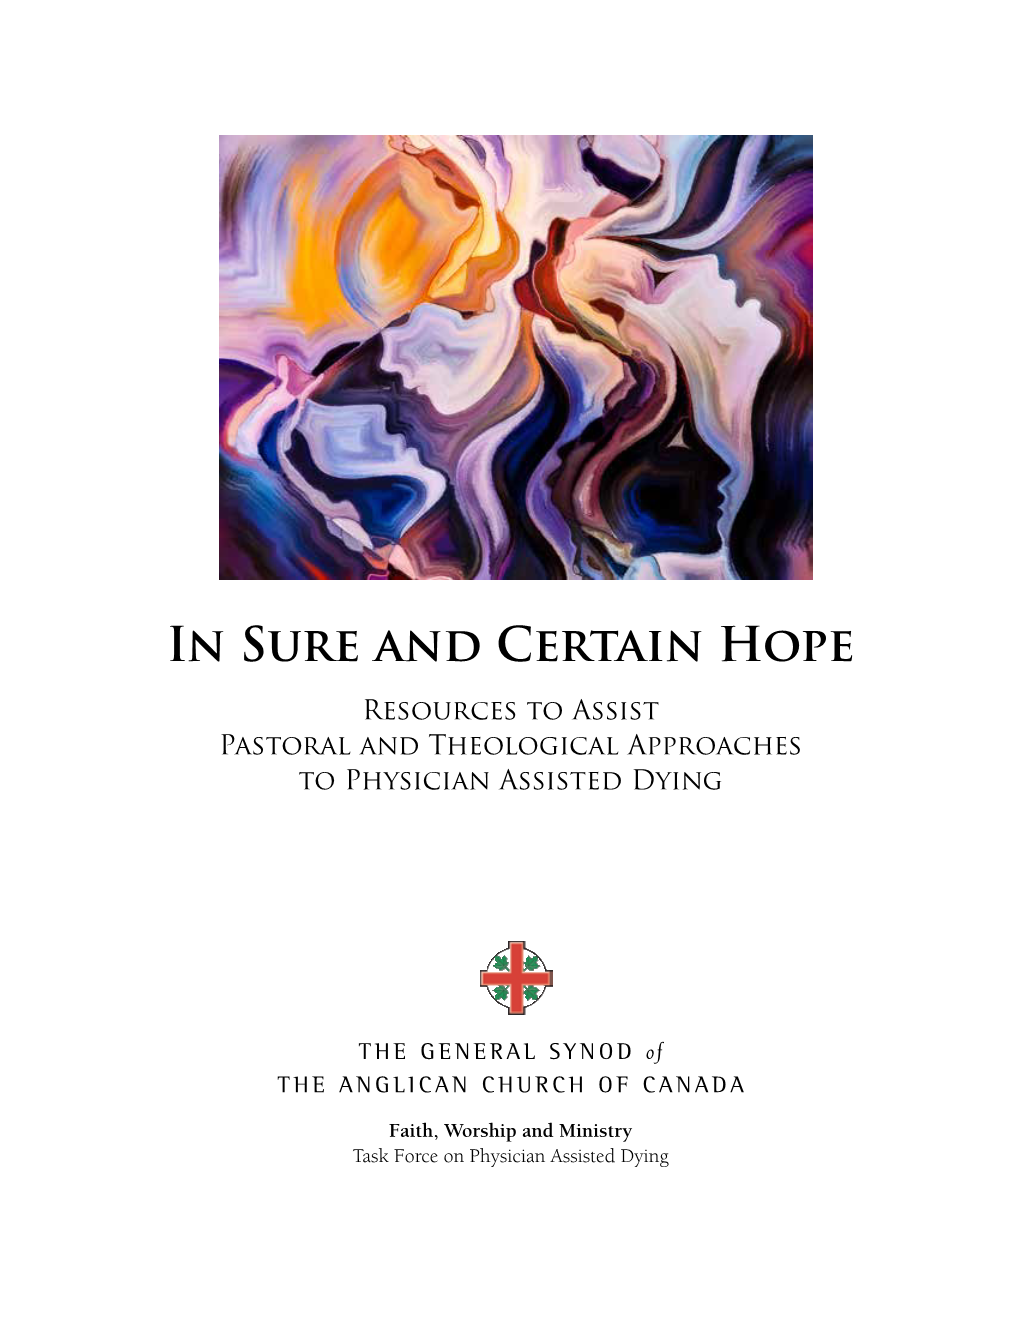 In Sure and Certain Hope Resources to Assist Pastoral and Theological Approaches to Physician Assisted Dying